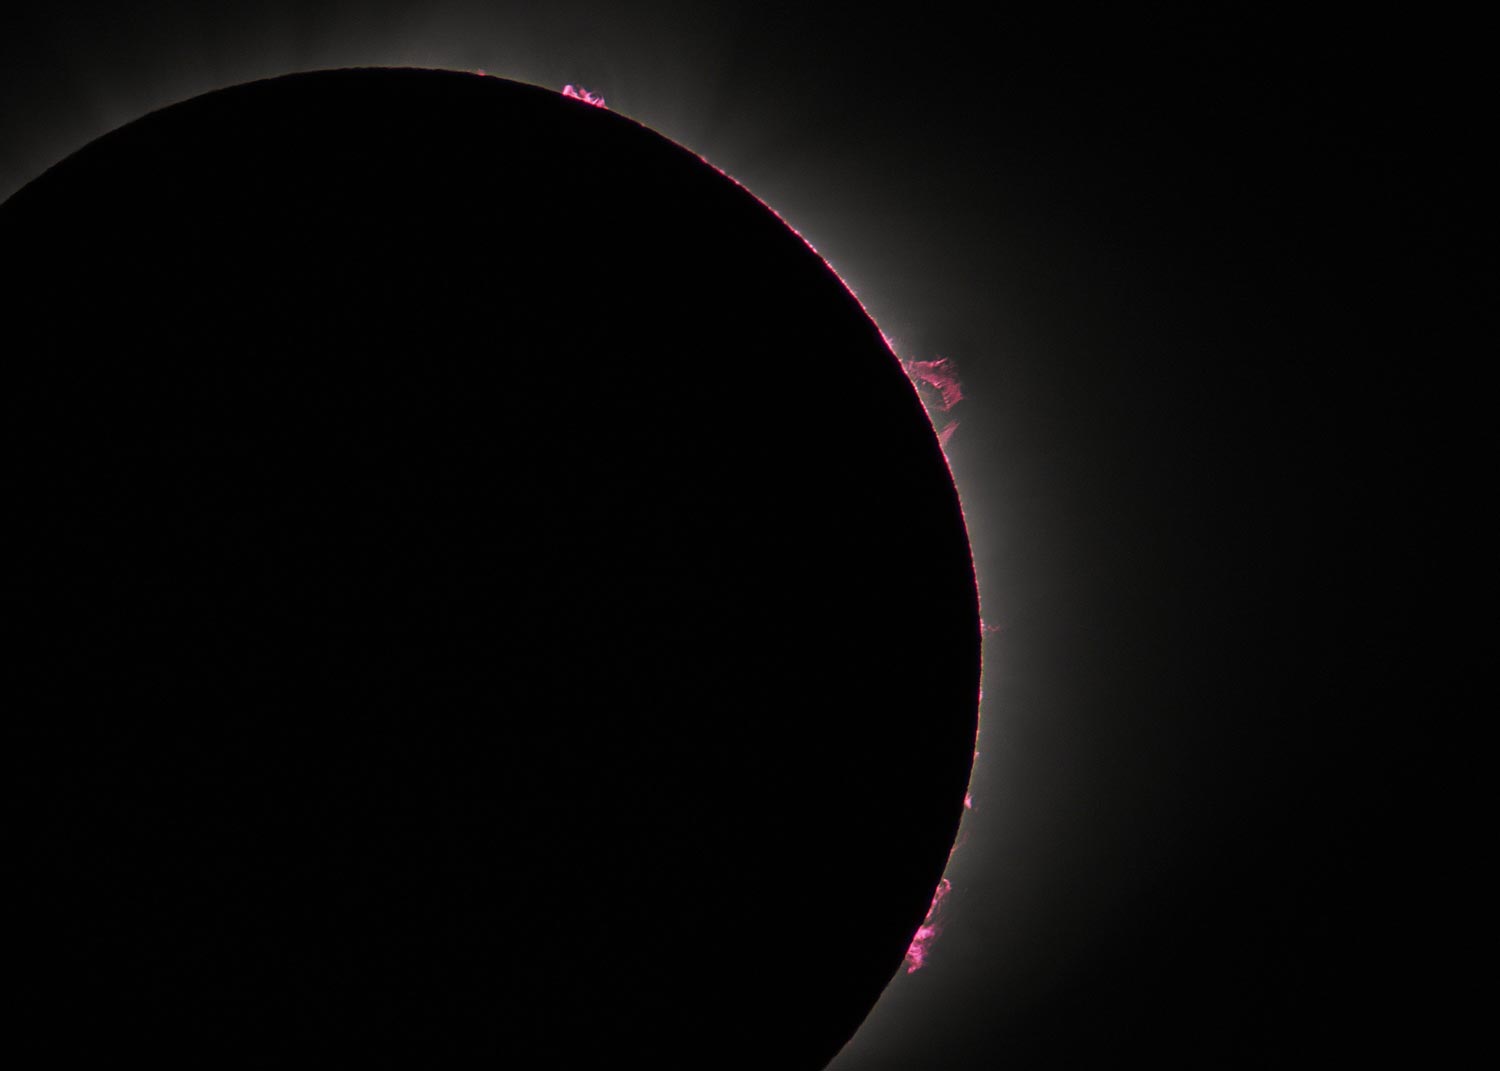 170821-Wyoming-Eclipse-92-Cropped.jpg